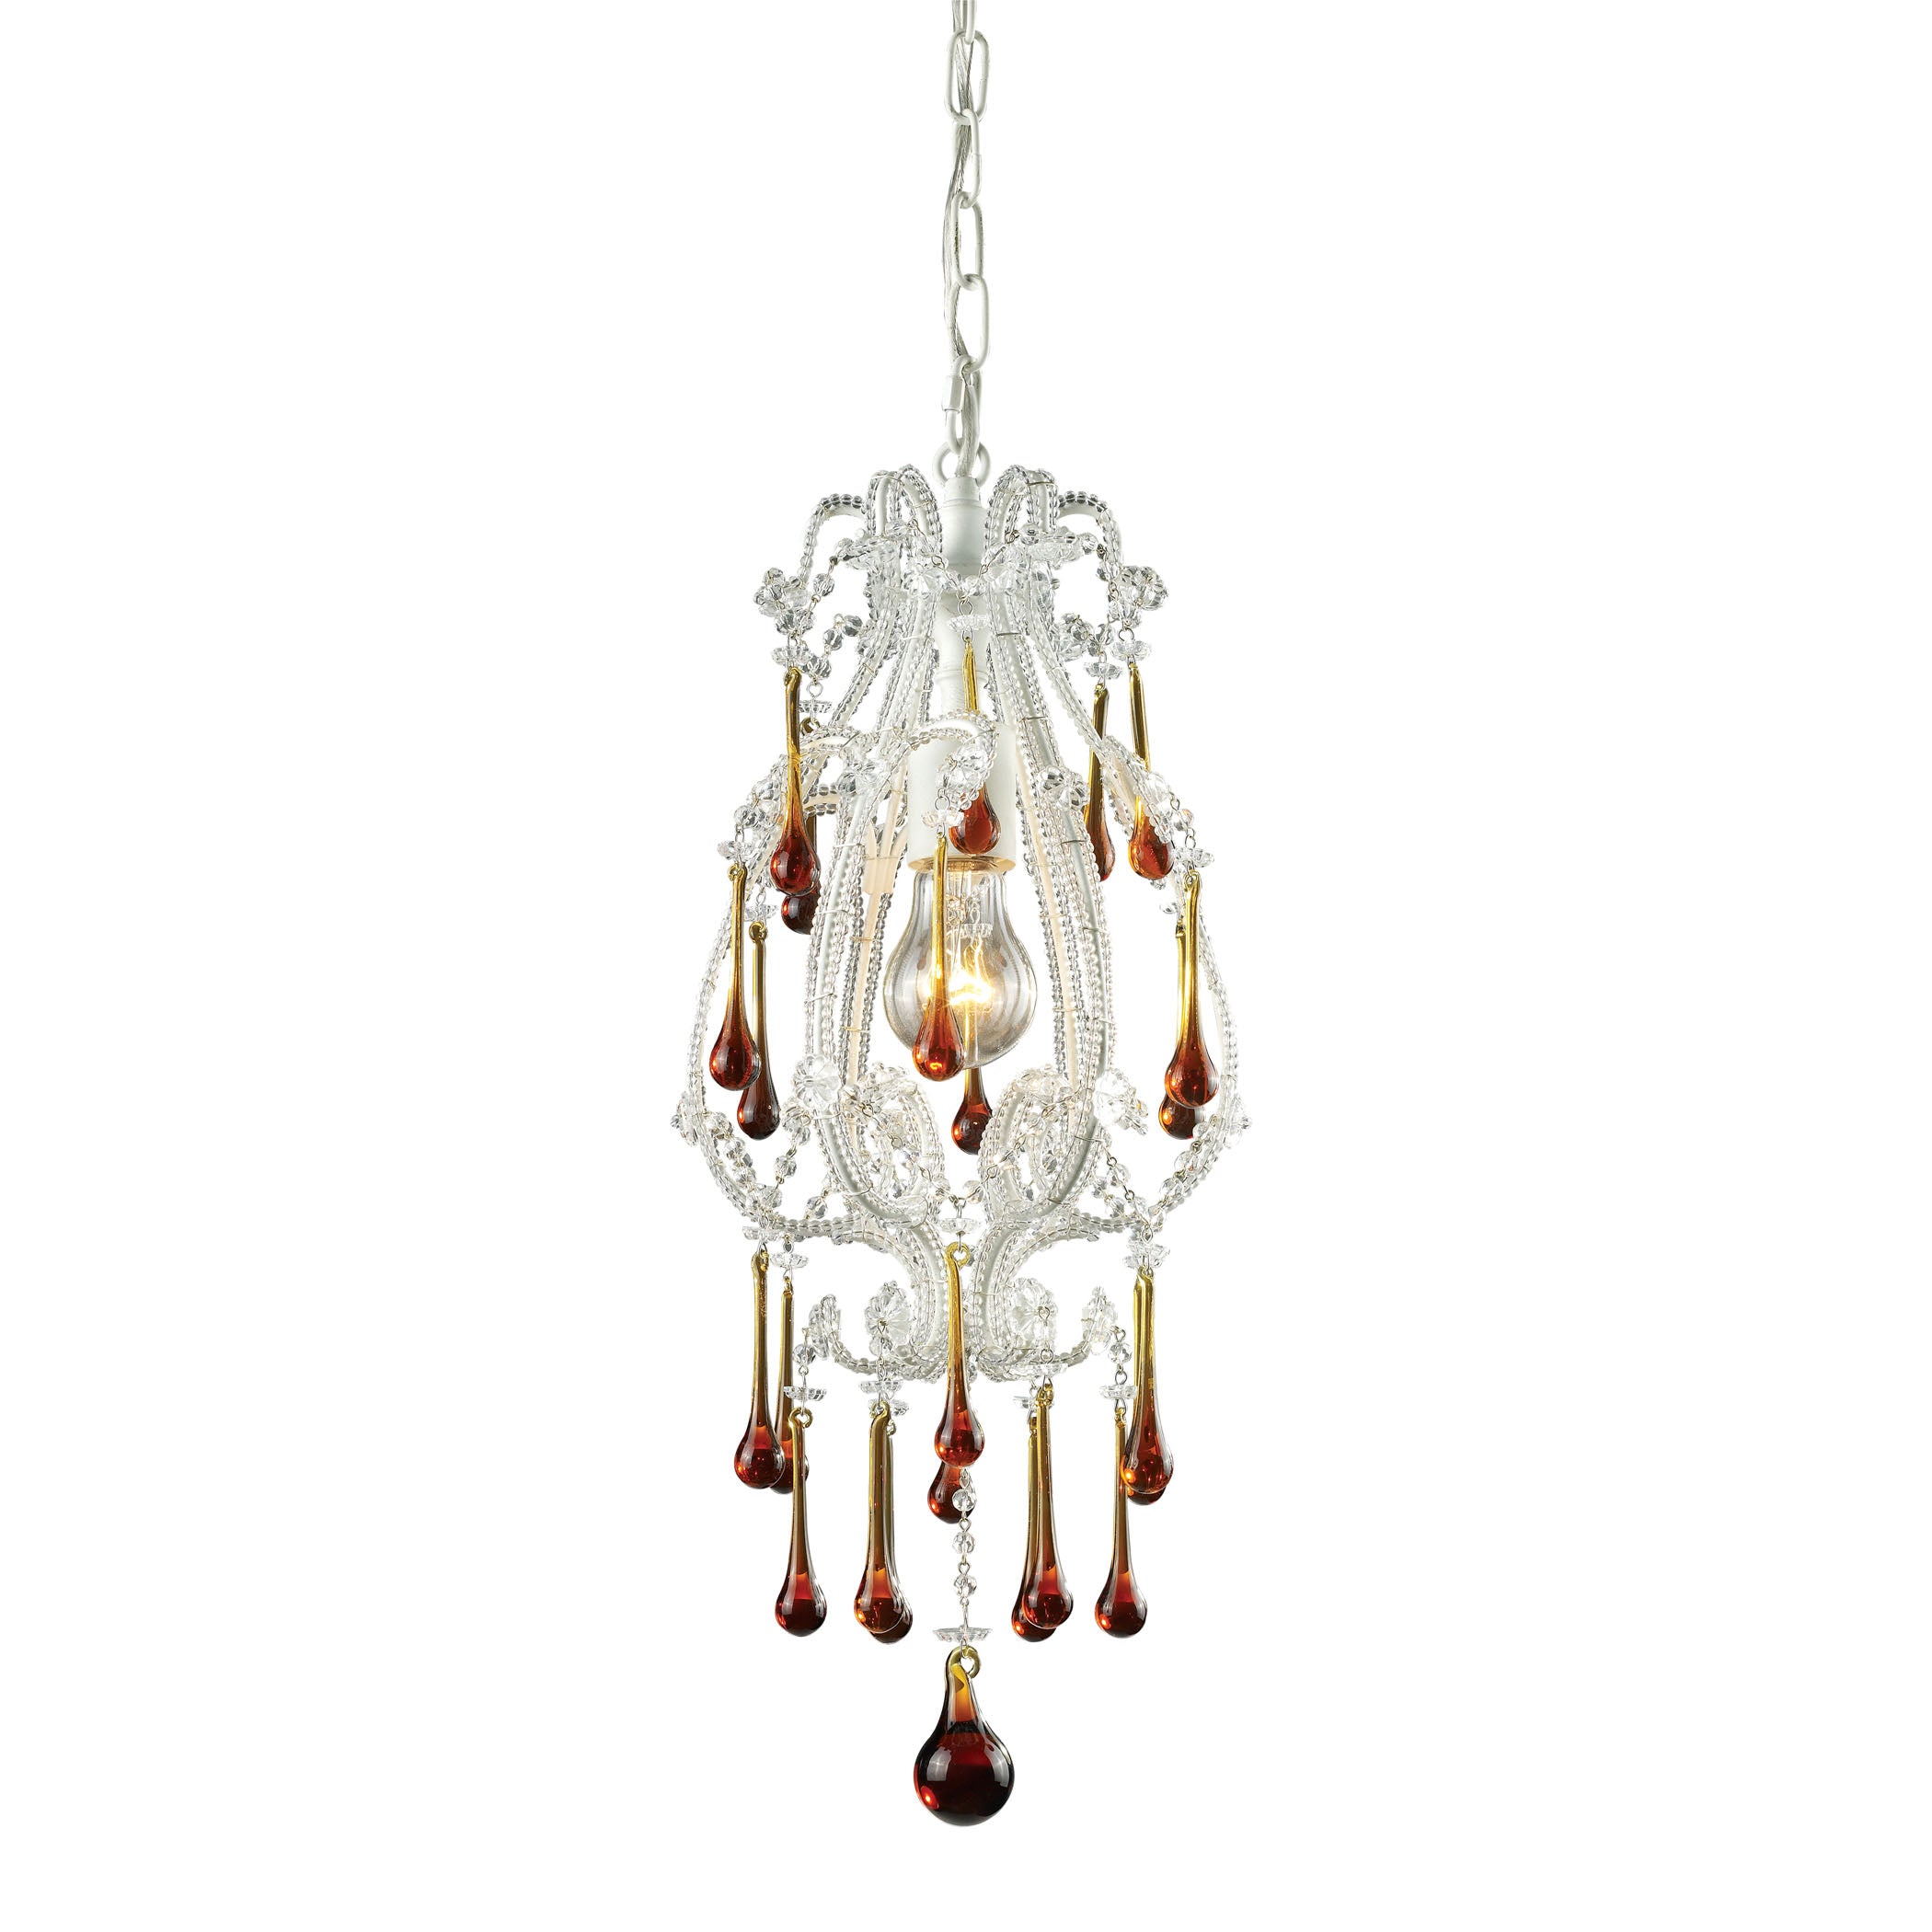 ELK Lighting 12003/1AMB Opulence 1-Light Mini Pendant in Antique White with Amber Crystals